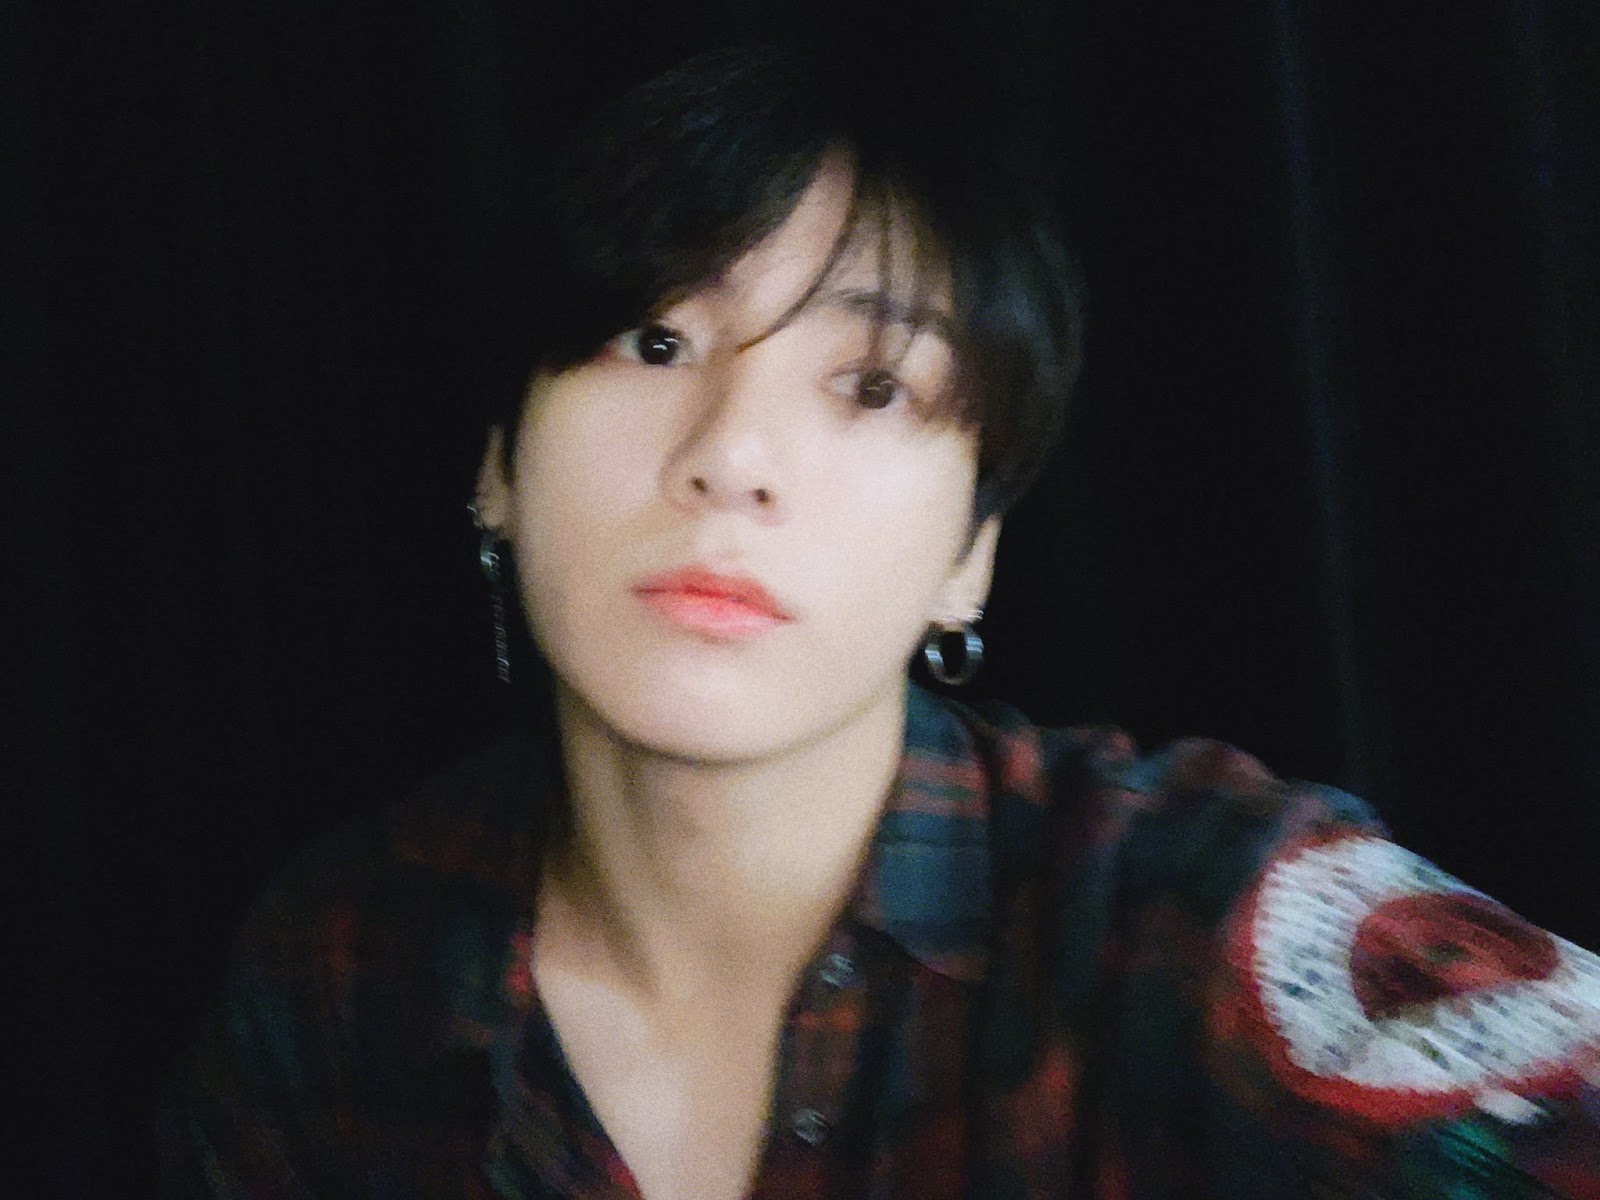 BTS' Jungkook Surprised Fans By Cutting His Long Hair